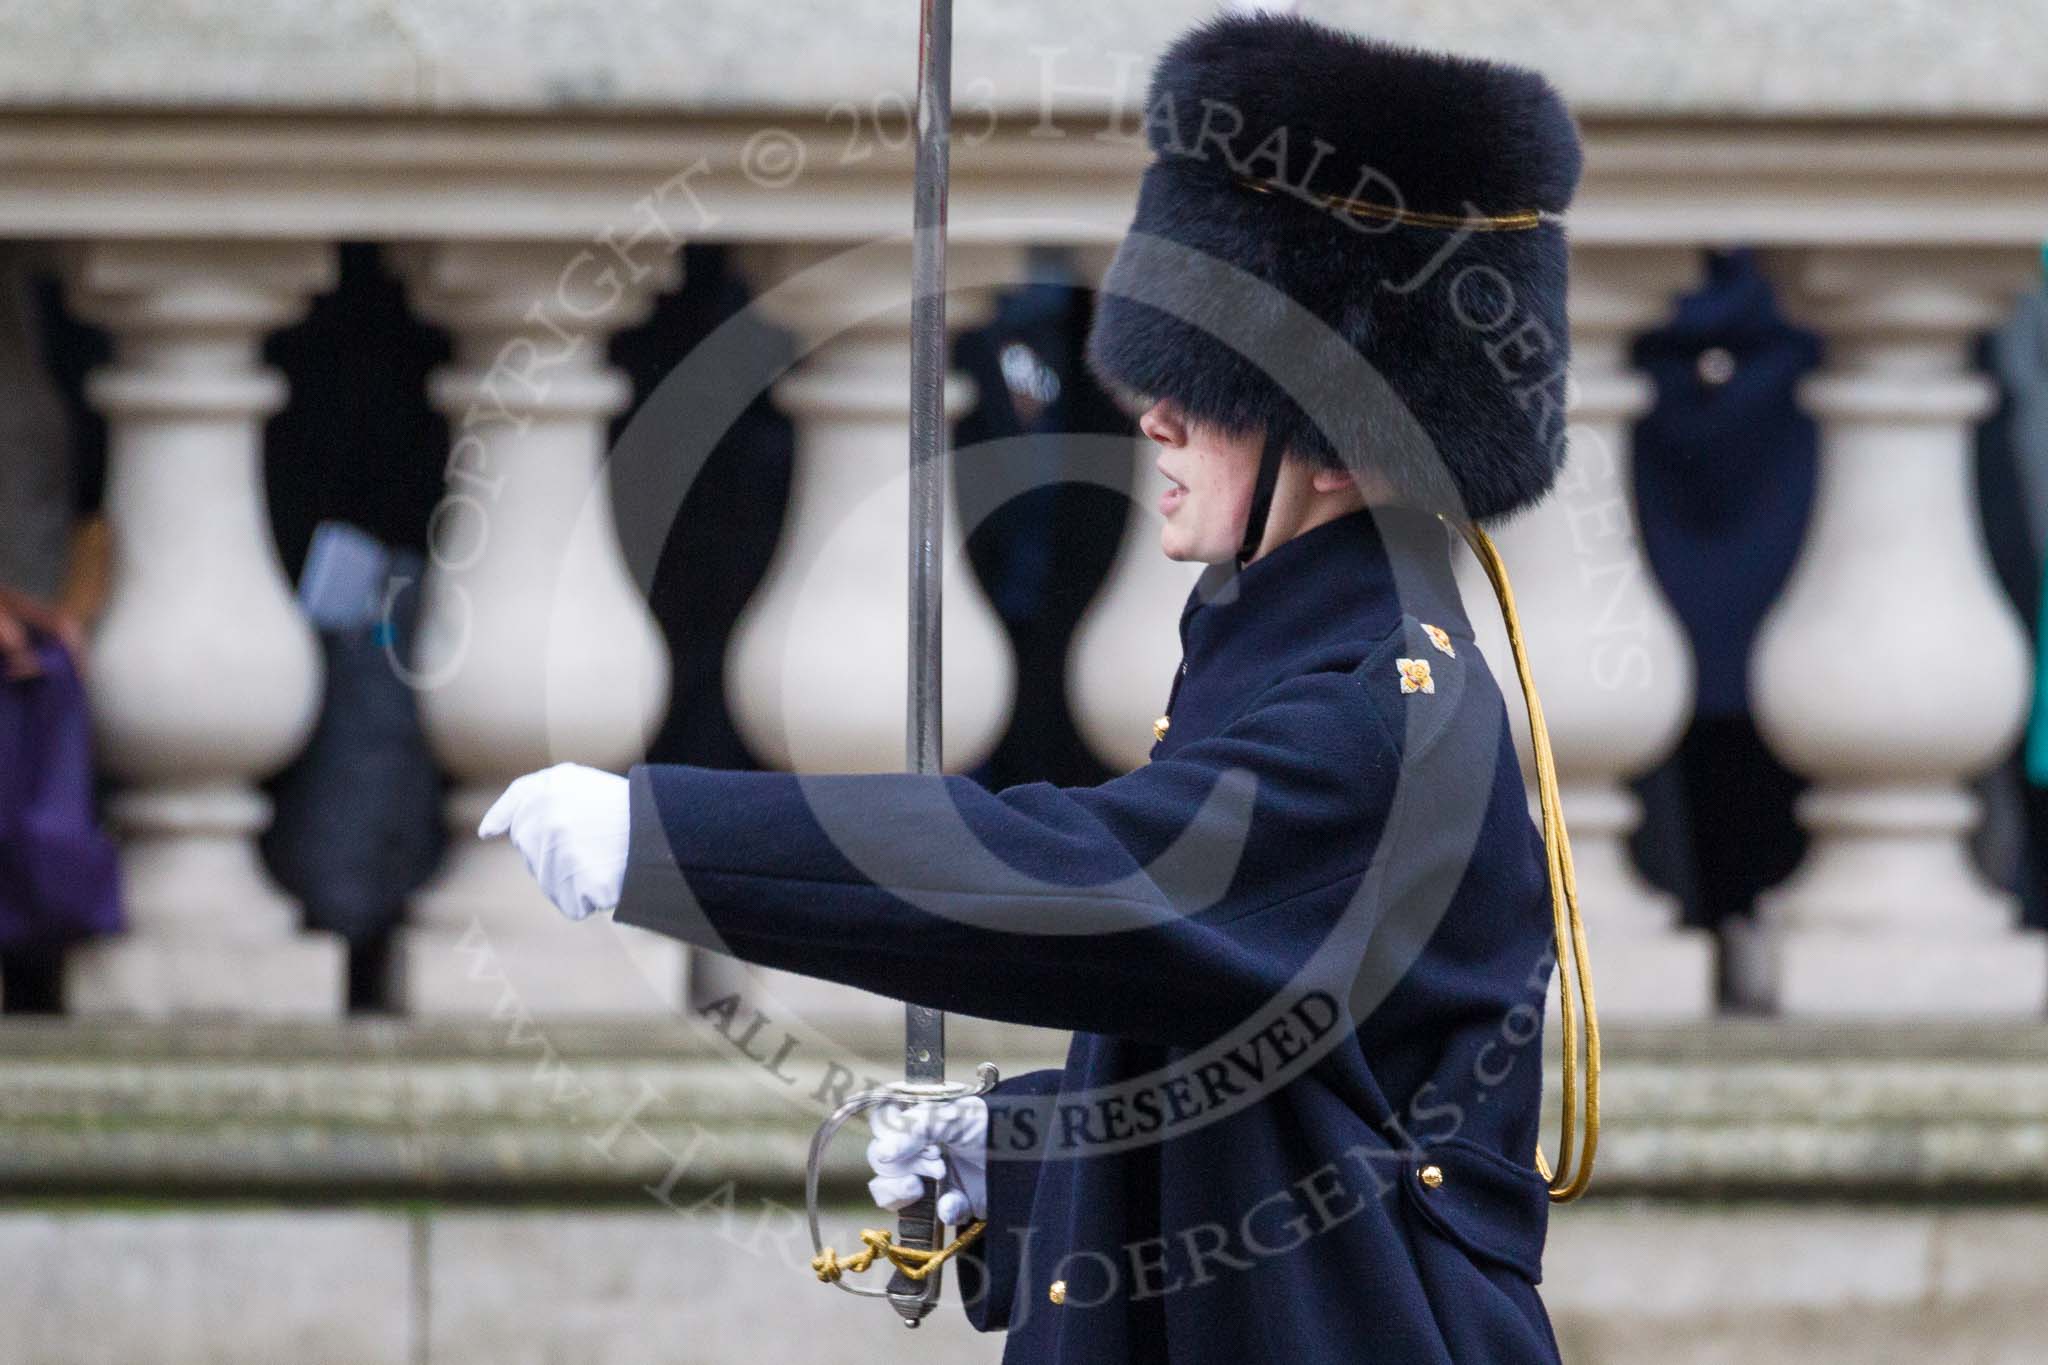 Remembrance Sunday at the Cenotaph 2015: Captain  Julie  Navarro,  Right  Section  Commander  at  the  Royal Horse Artillery,  commanding  the  detachment  on  parade as they are leaving Whitehall. Image #368, 08 November 2015 12:31 Whitehall, London, UK